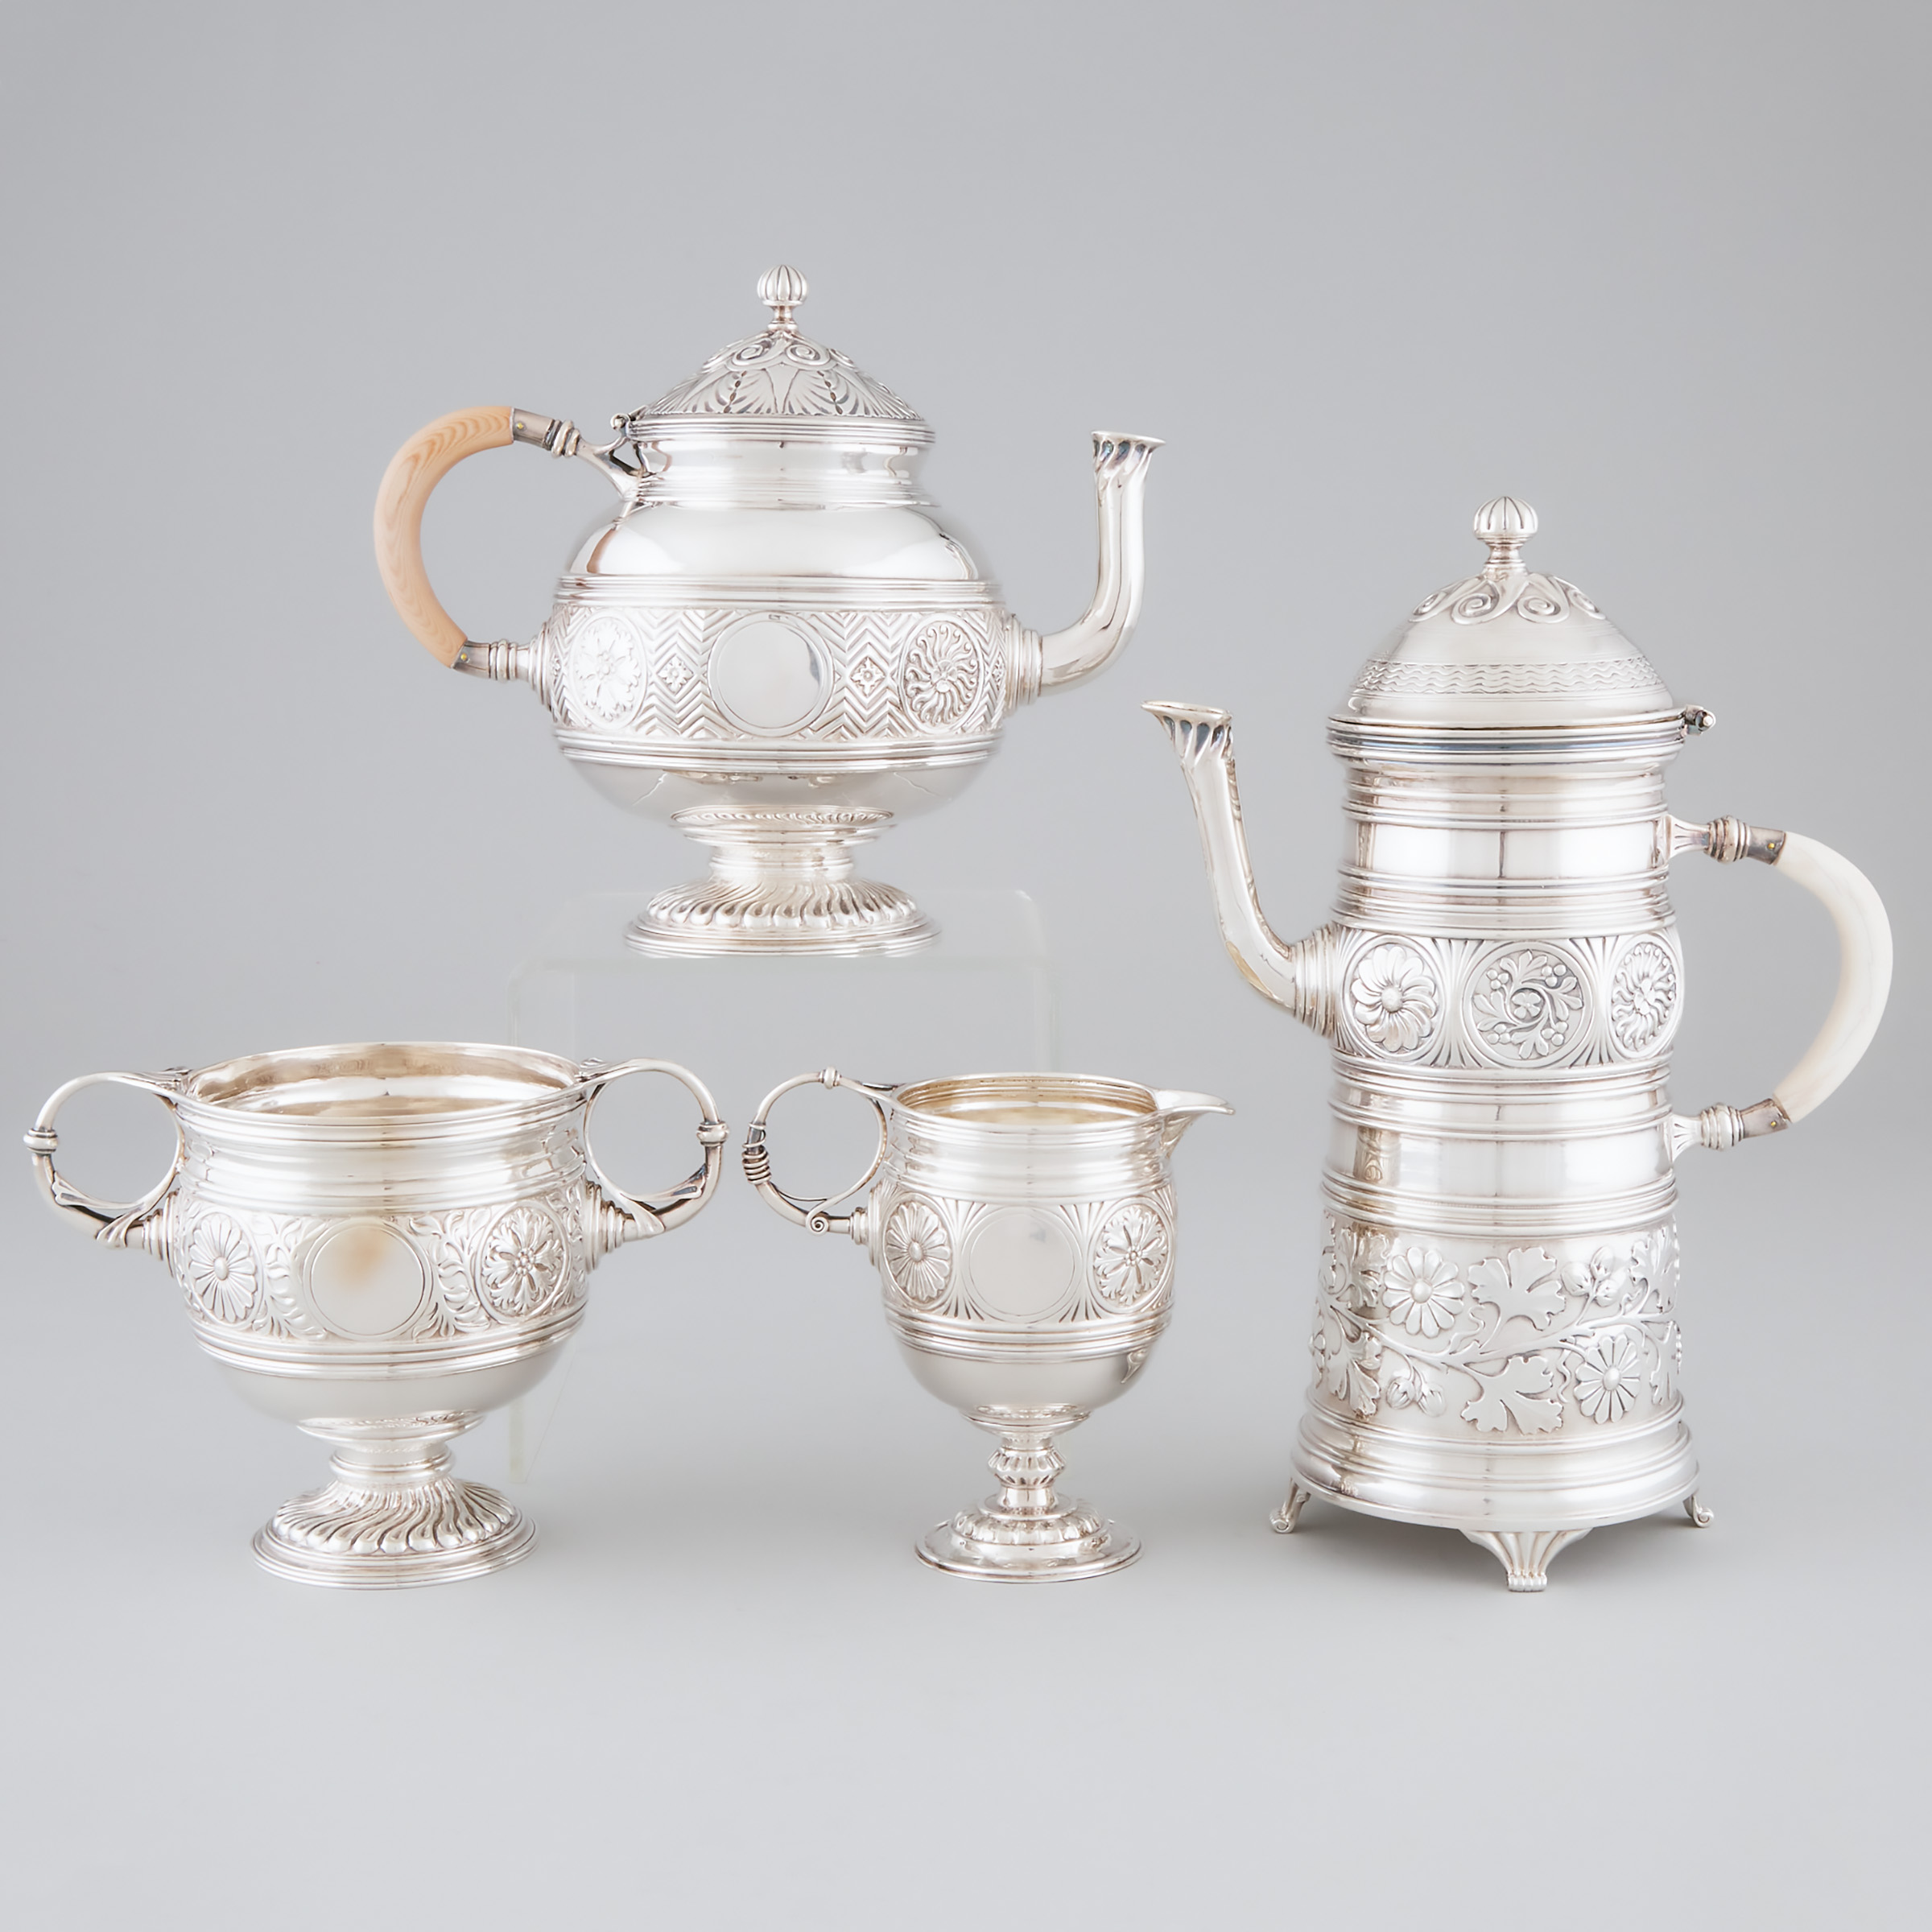 Victorian Silver Aesthetic Movement Tea and Coffee Service, J. Yates & Son, 1879